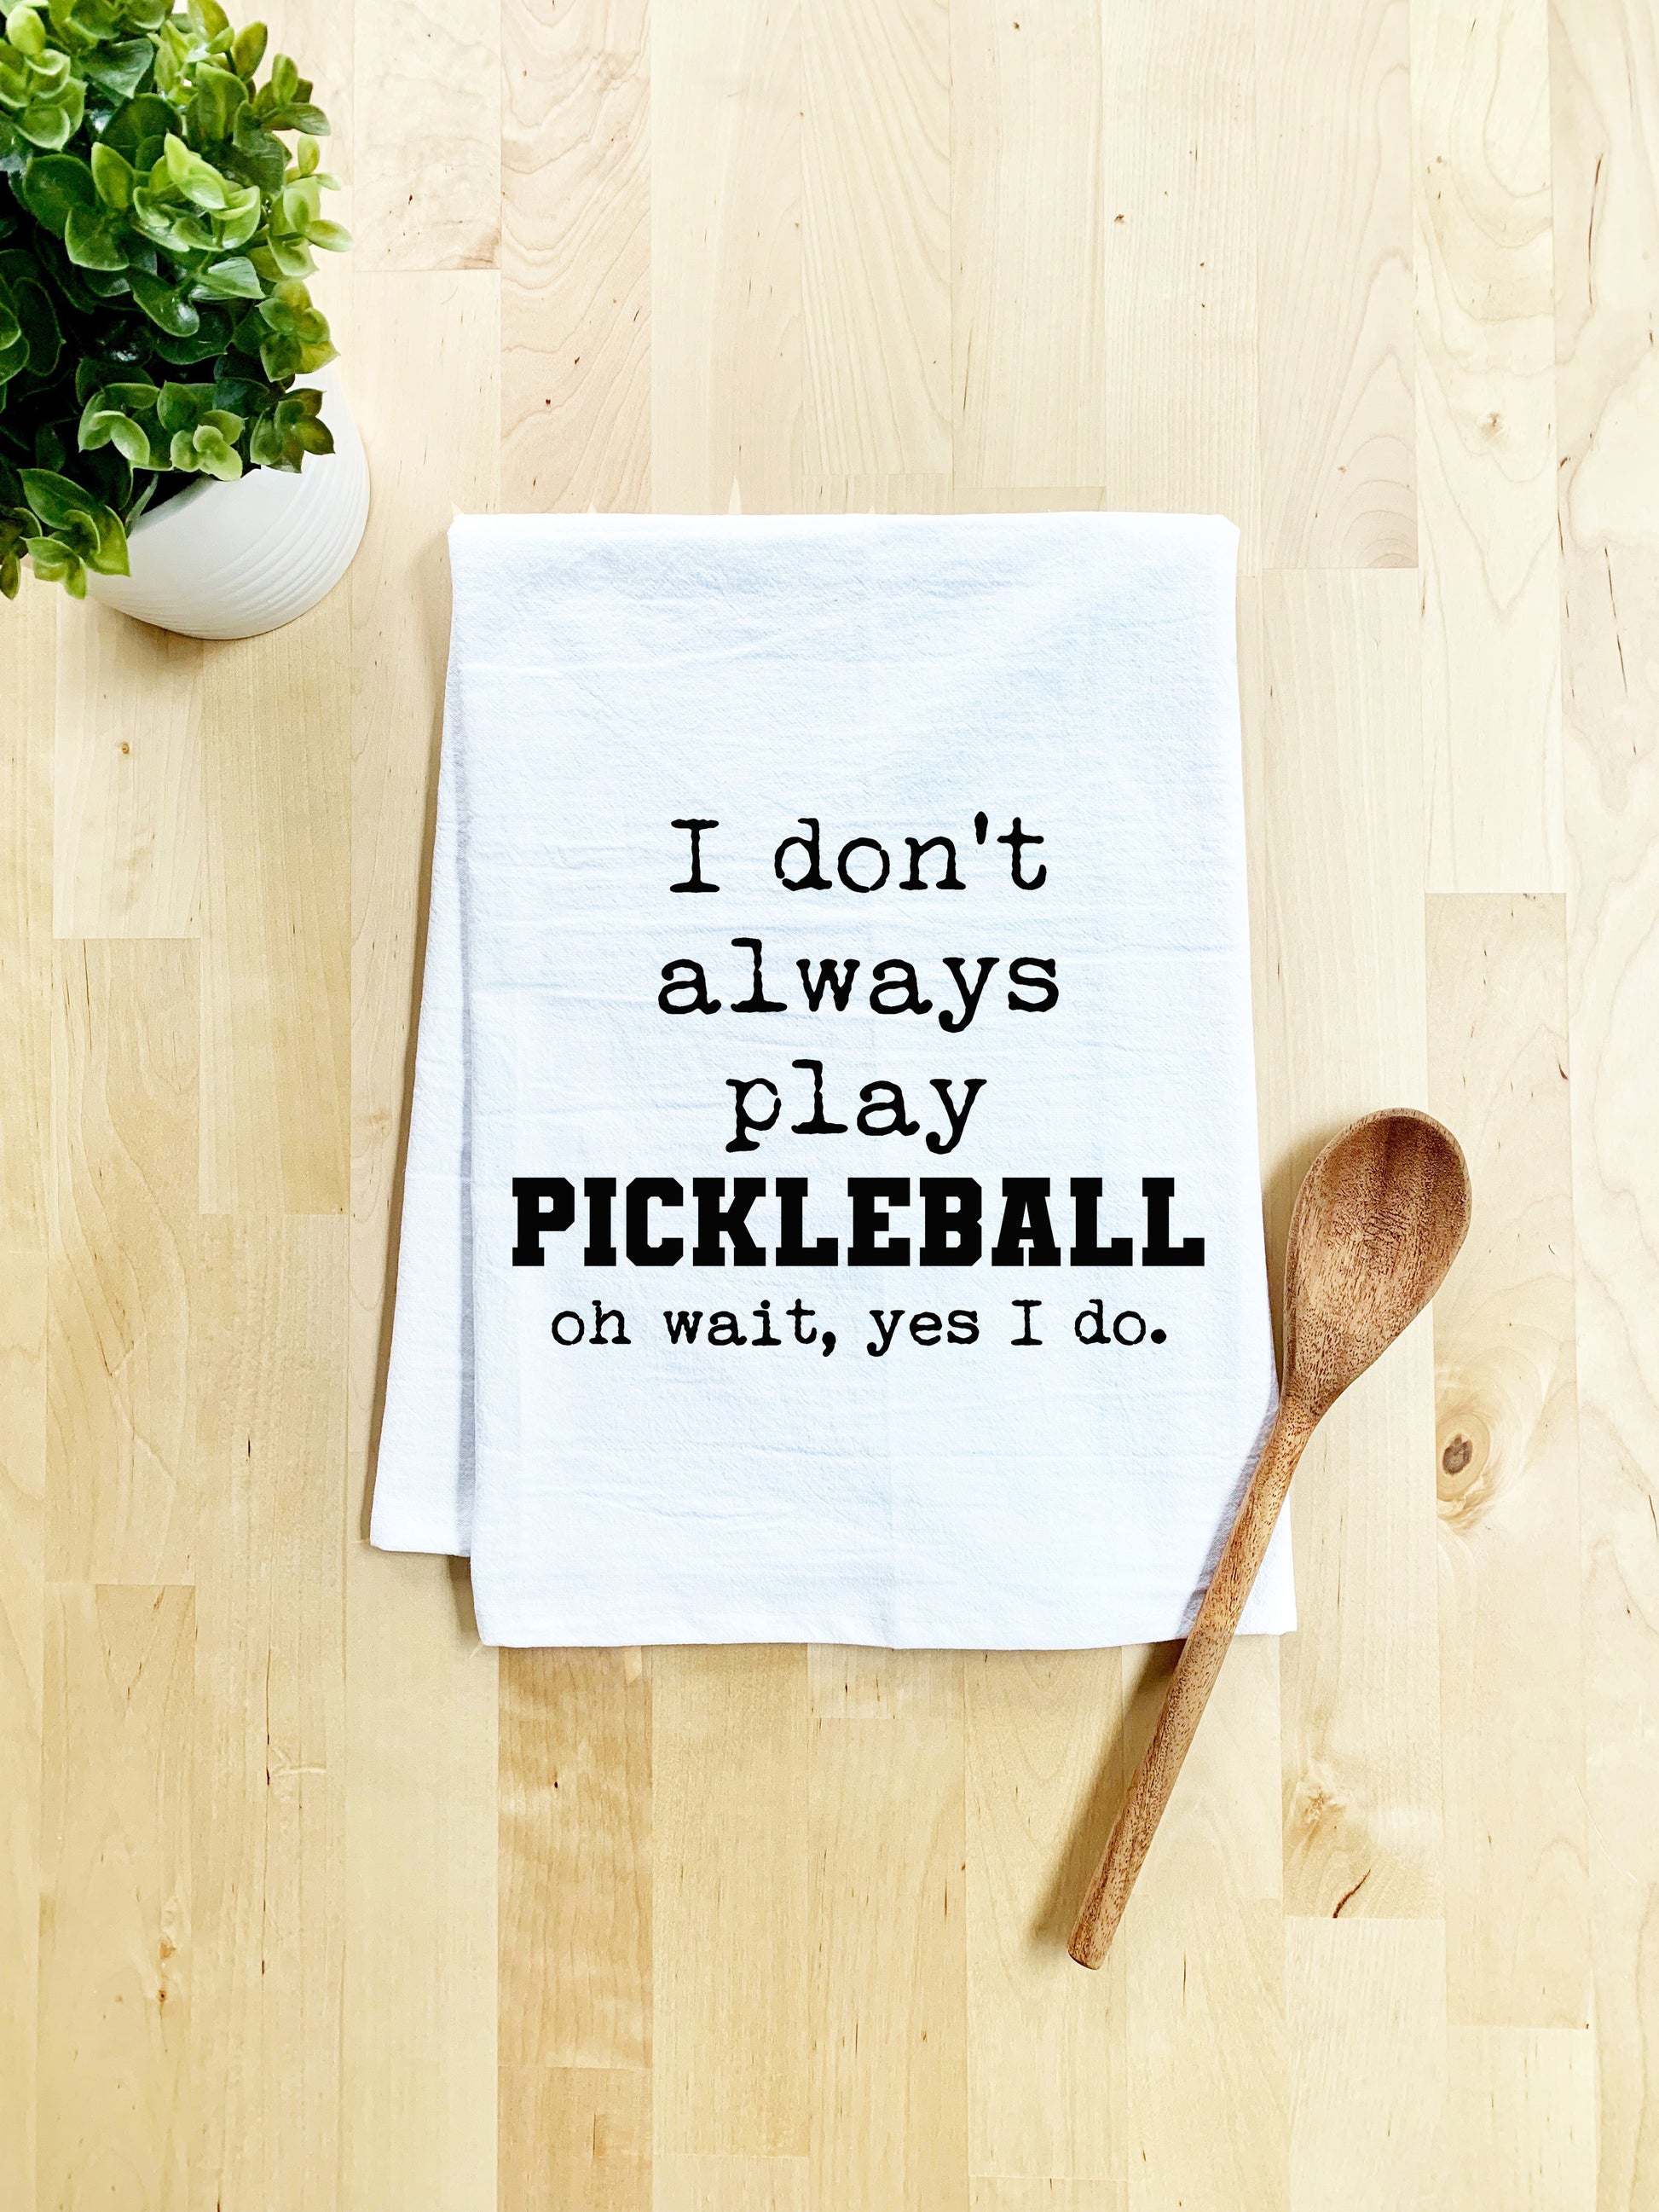 I Don't Always Play Pickleball (Oh Wait, Yes I Do) - Dish Towel - White Or Gray - MoonlightMakers